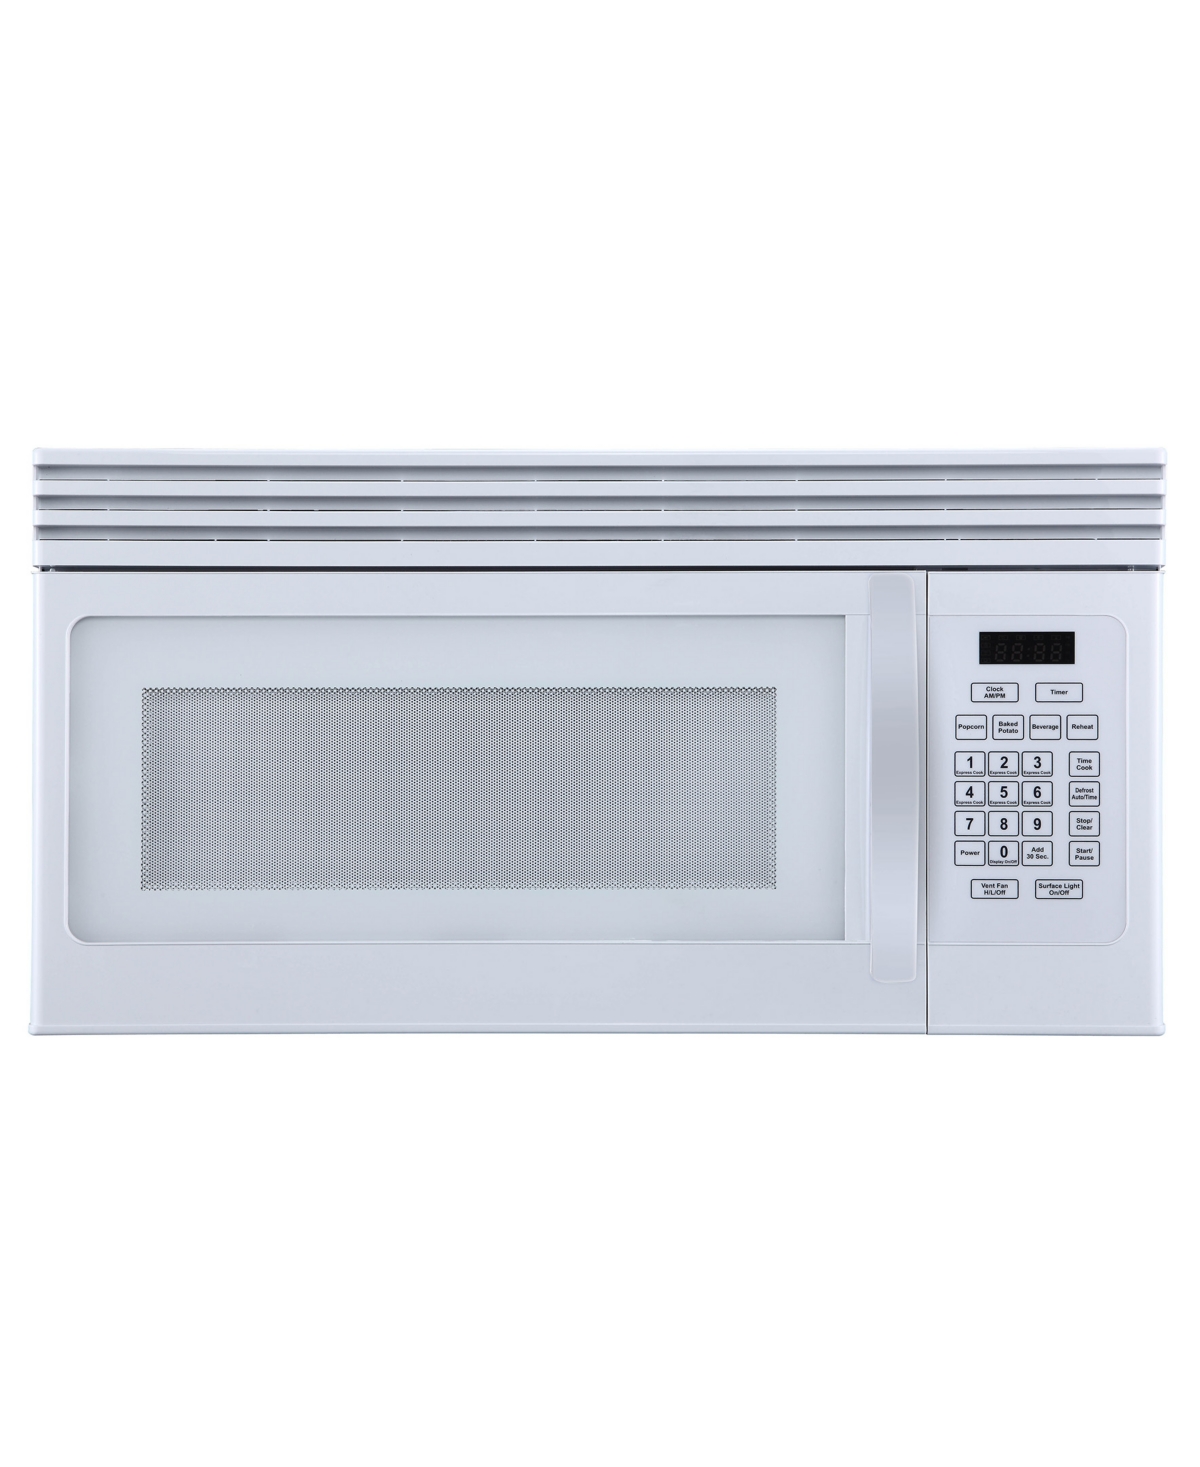 Black & Decker Over The Range 1.6 Cubic Feet Microwave With Top Mount Air Recirculation Vent In Black